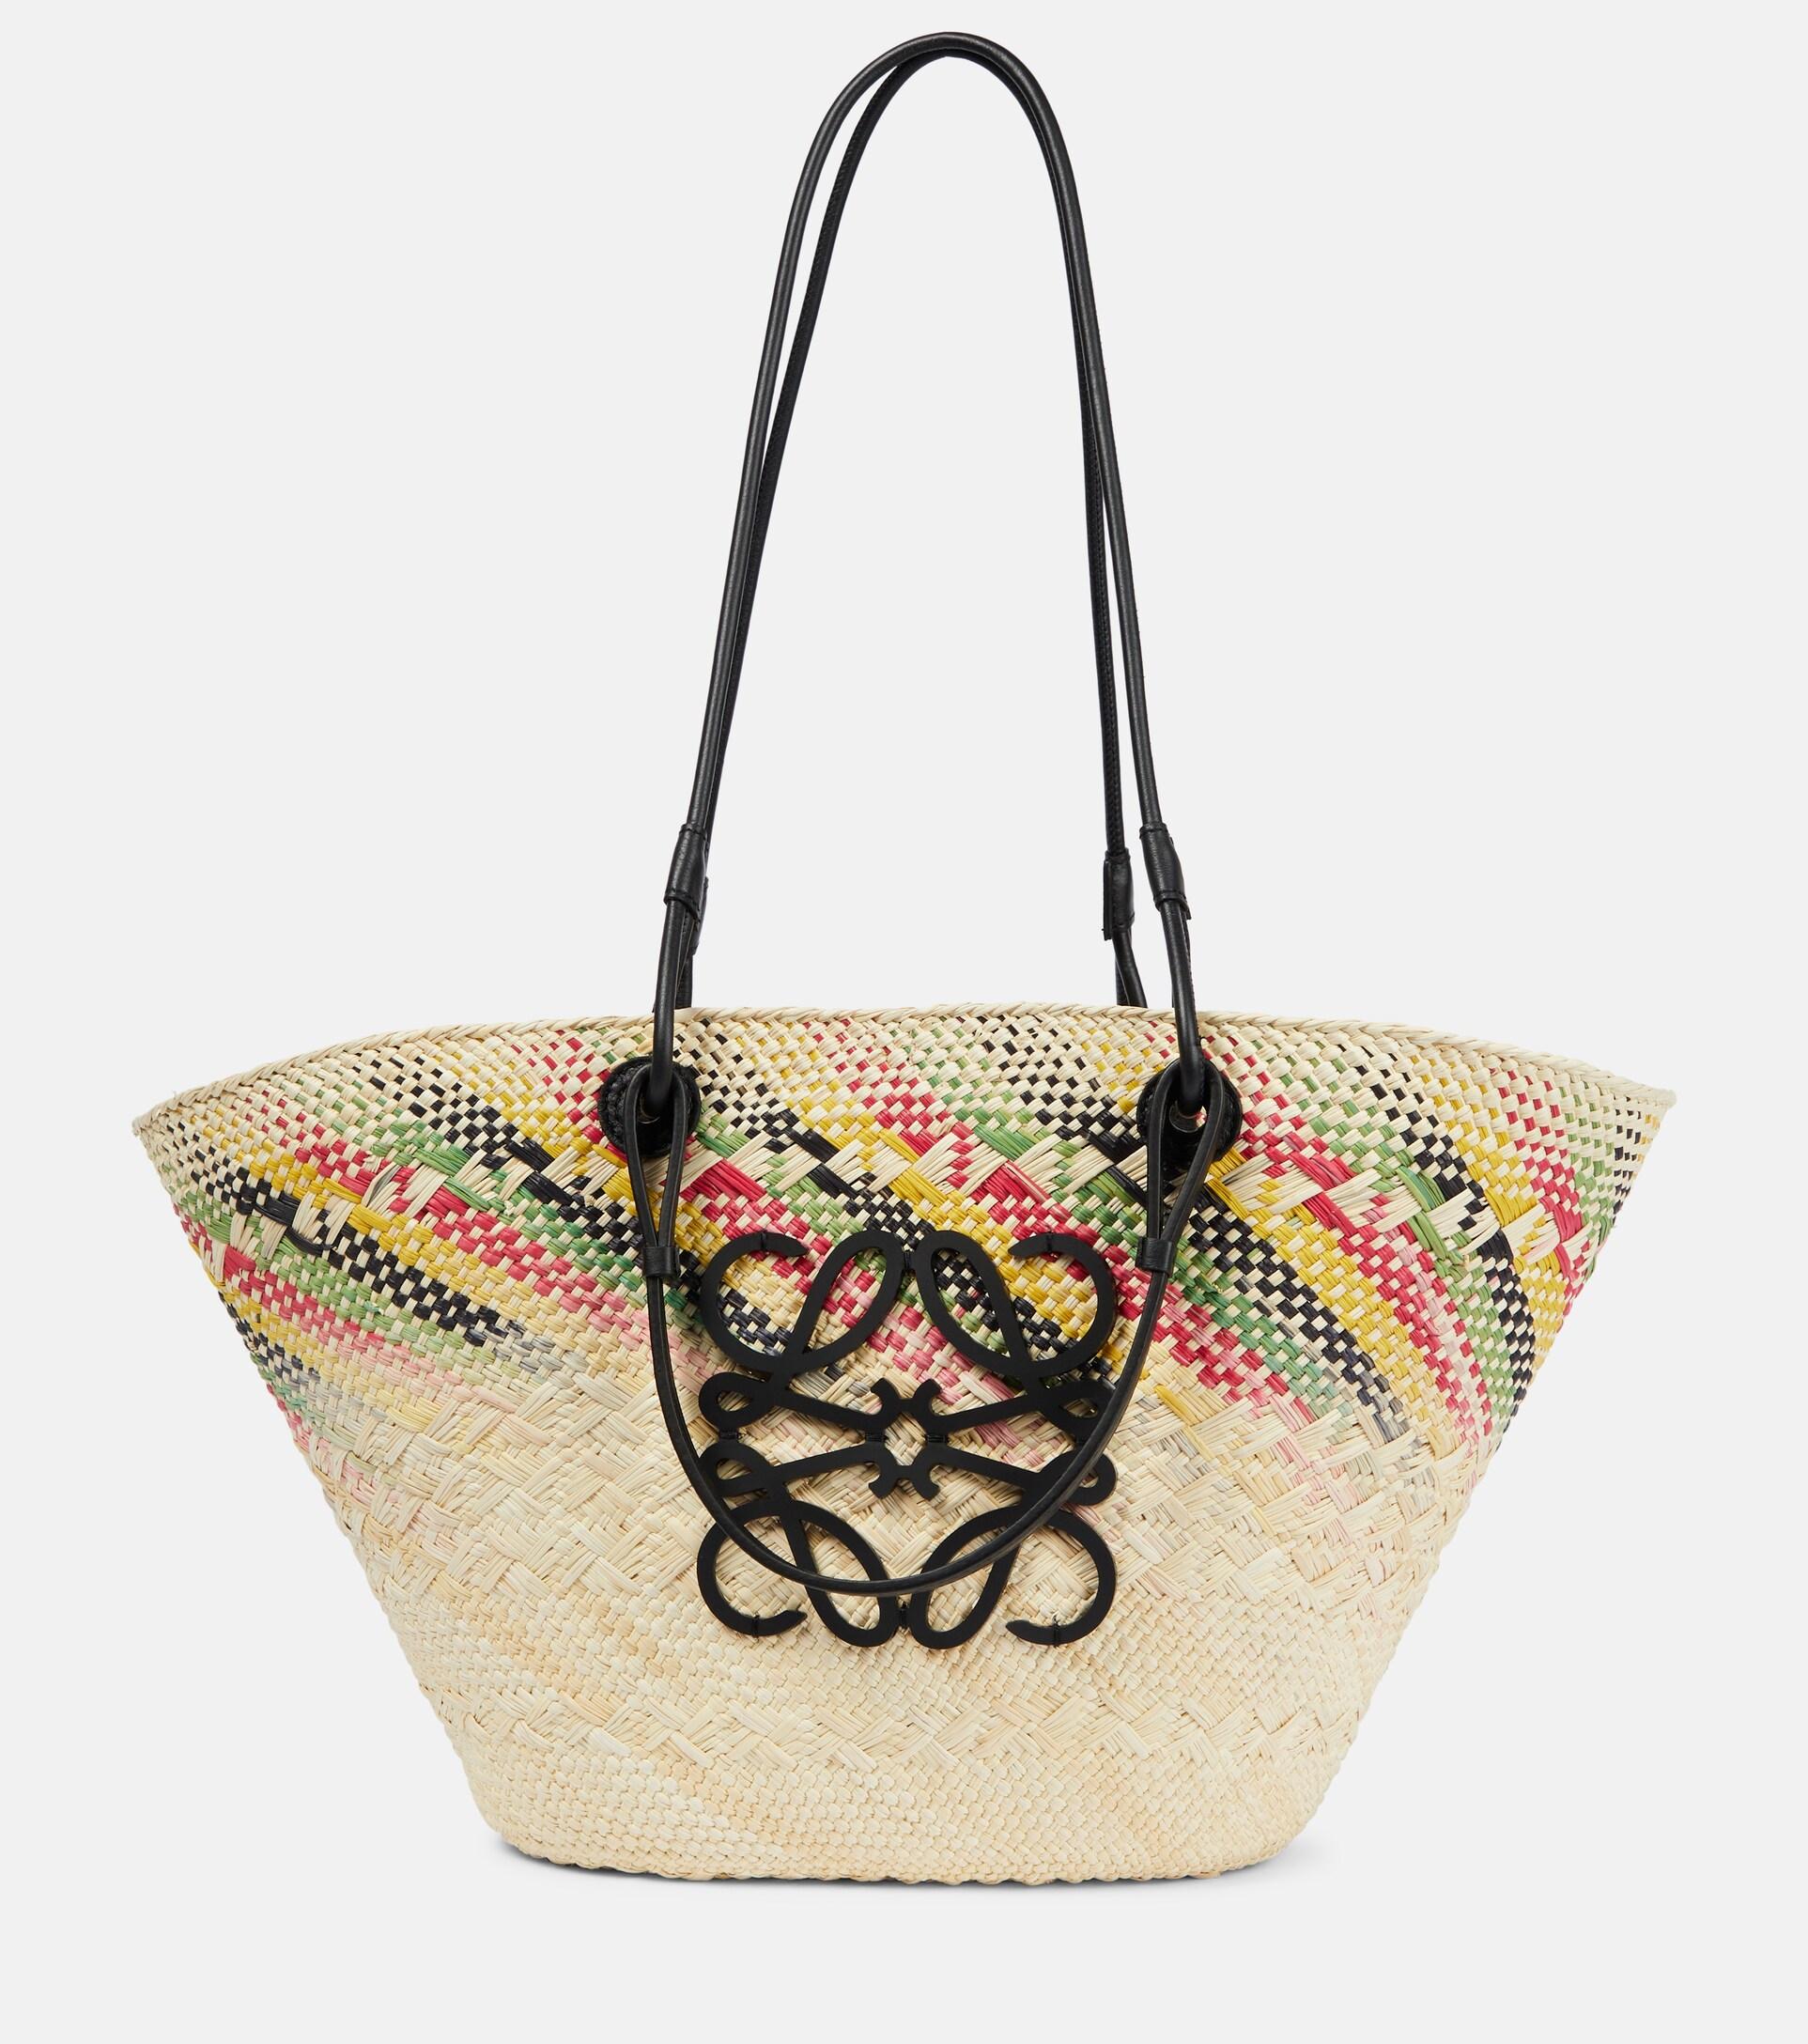 Loewe Small Rainbow Anagram Basket In Iraca Palm And Calfskin in